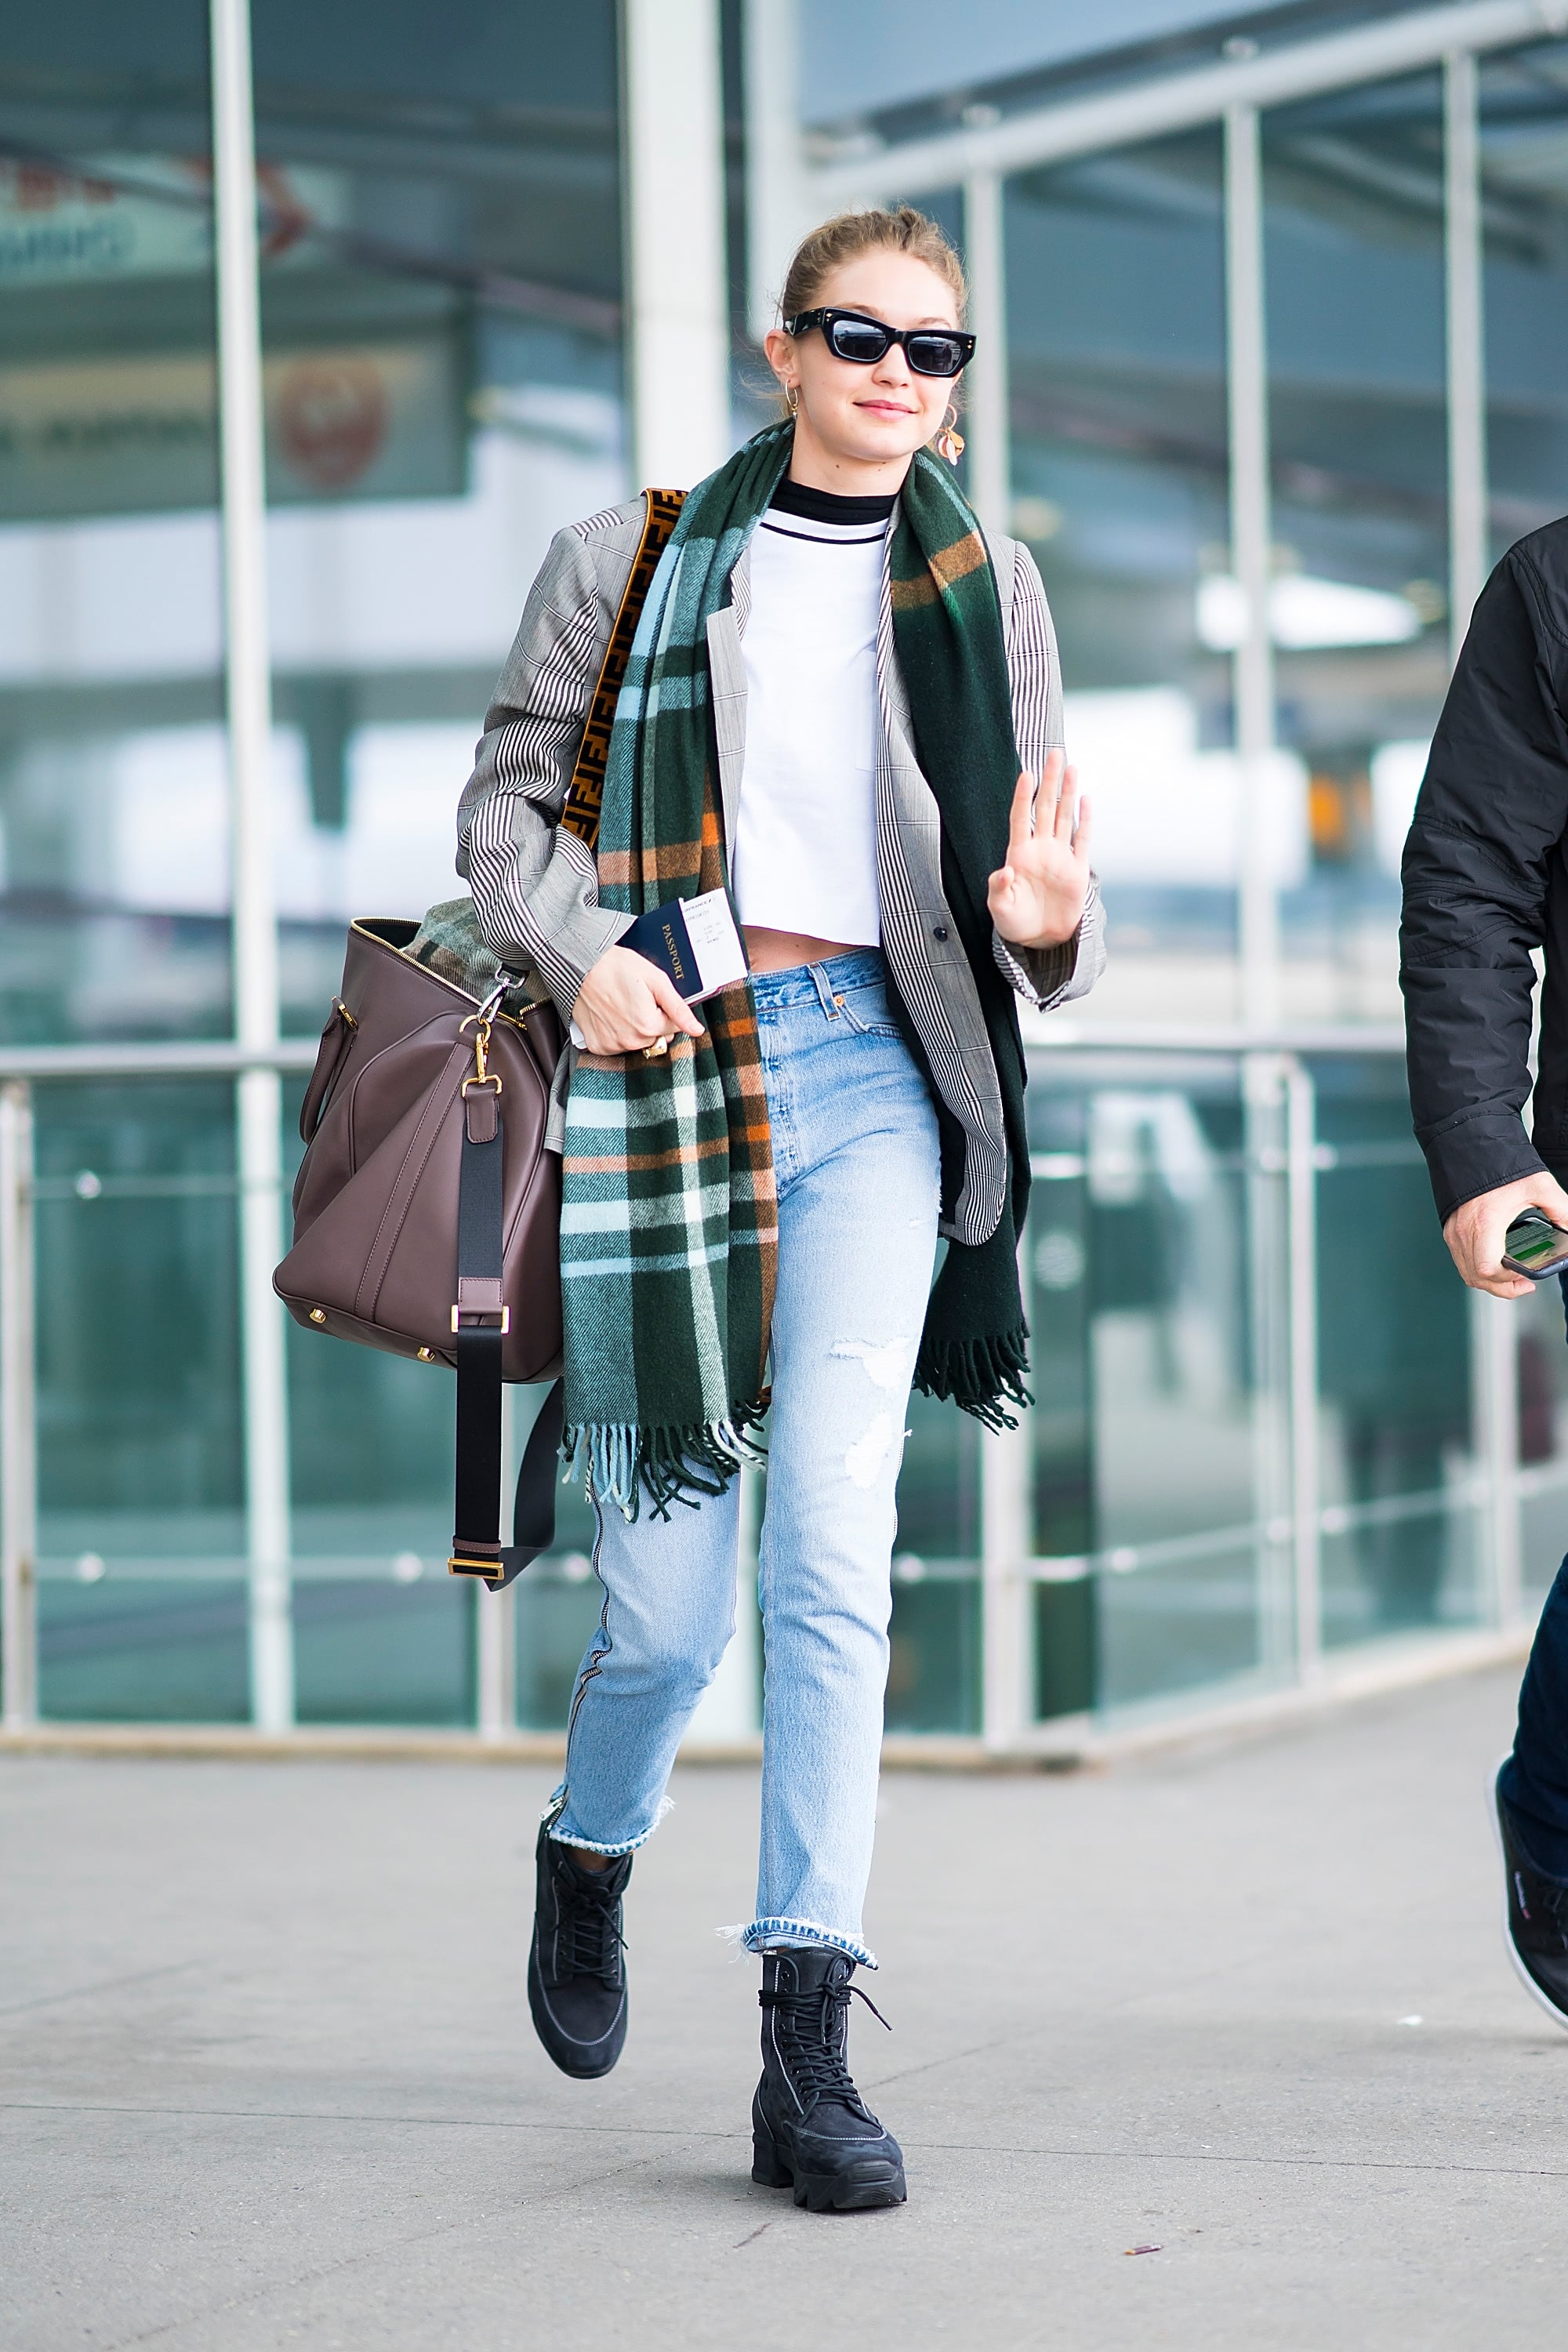 Cute Airport Outfits